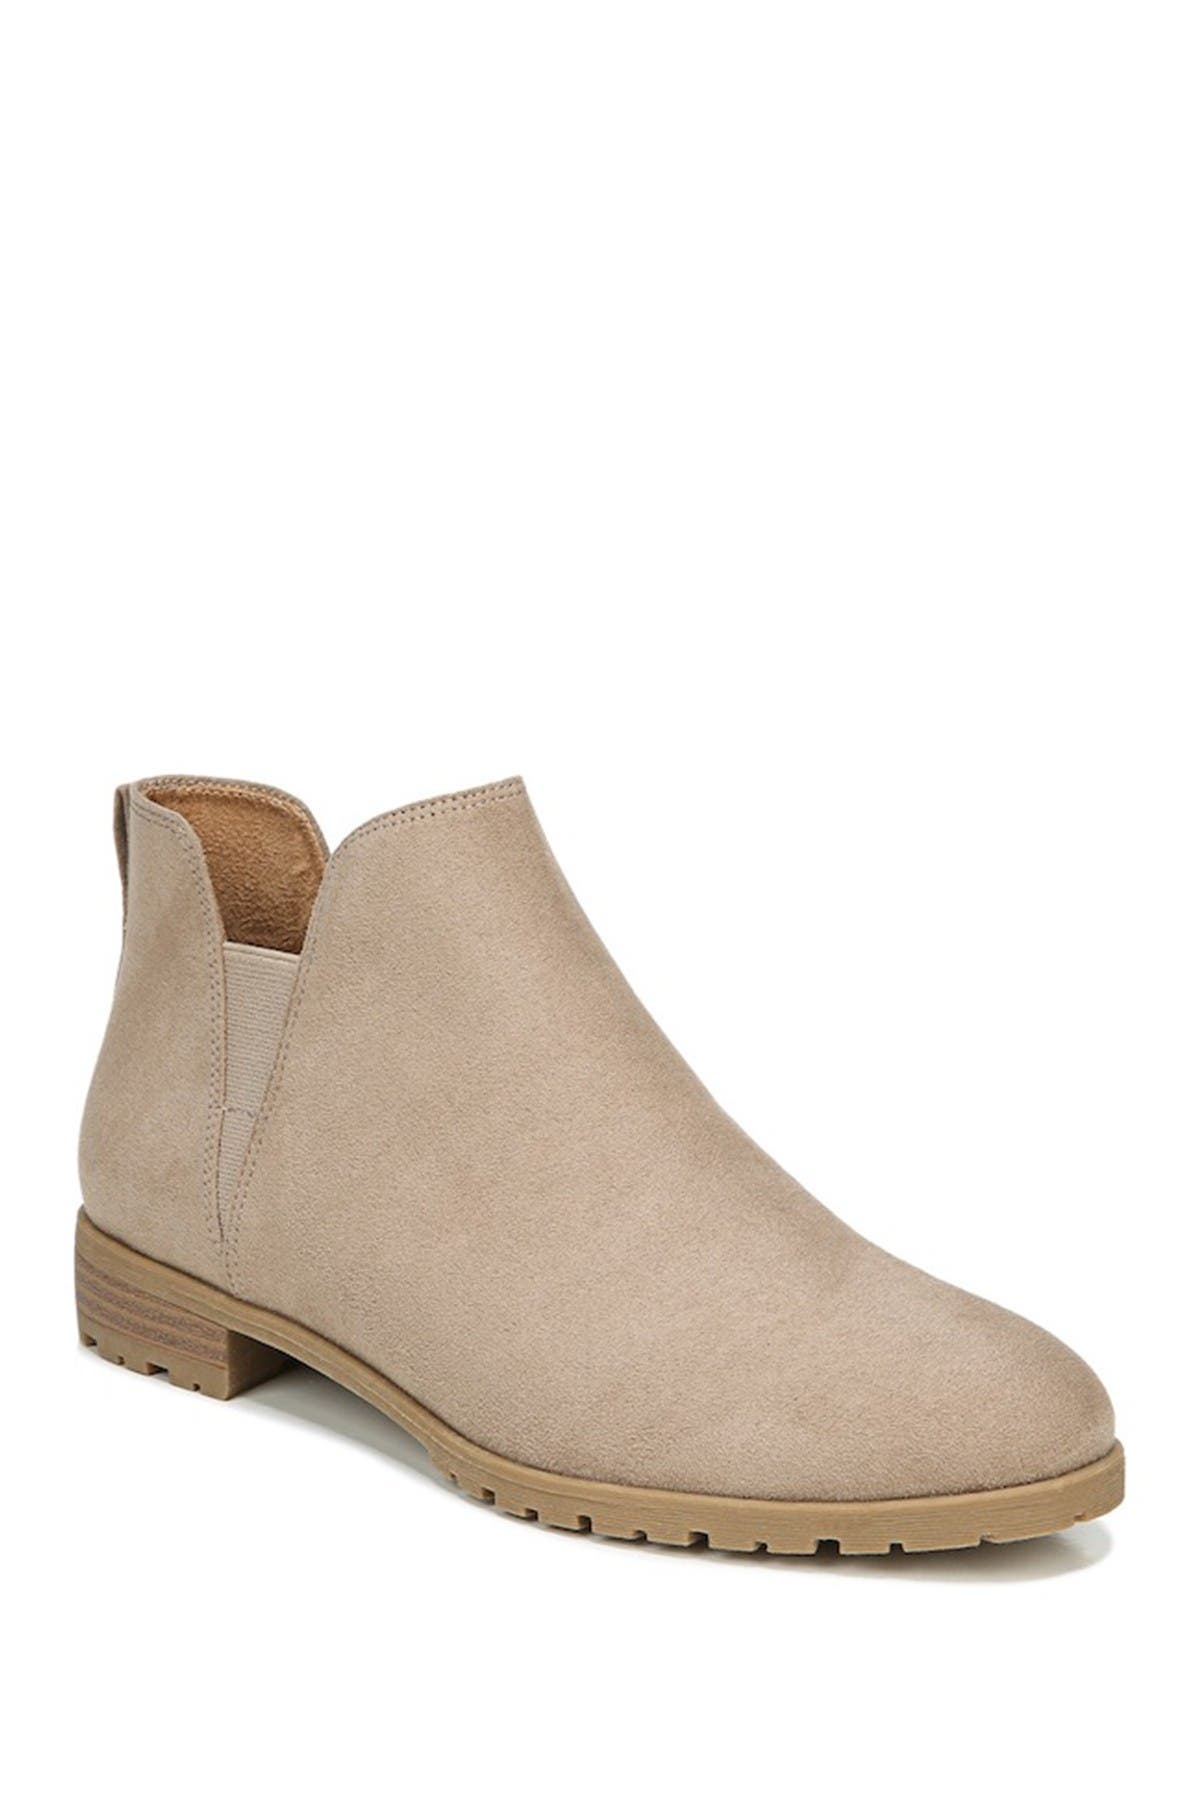 Dr. Scholl's | Real Cute Chelsea Boot 